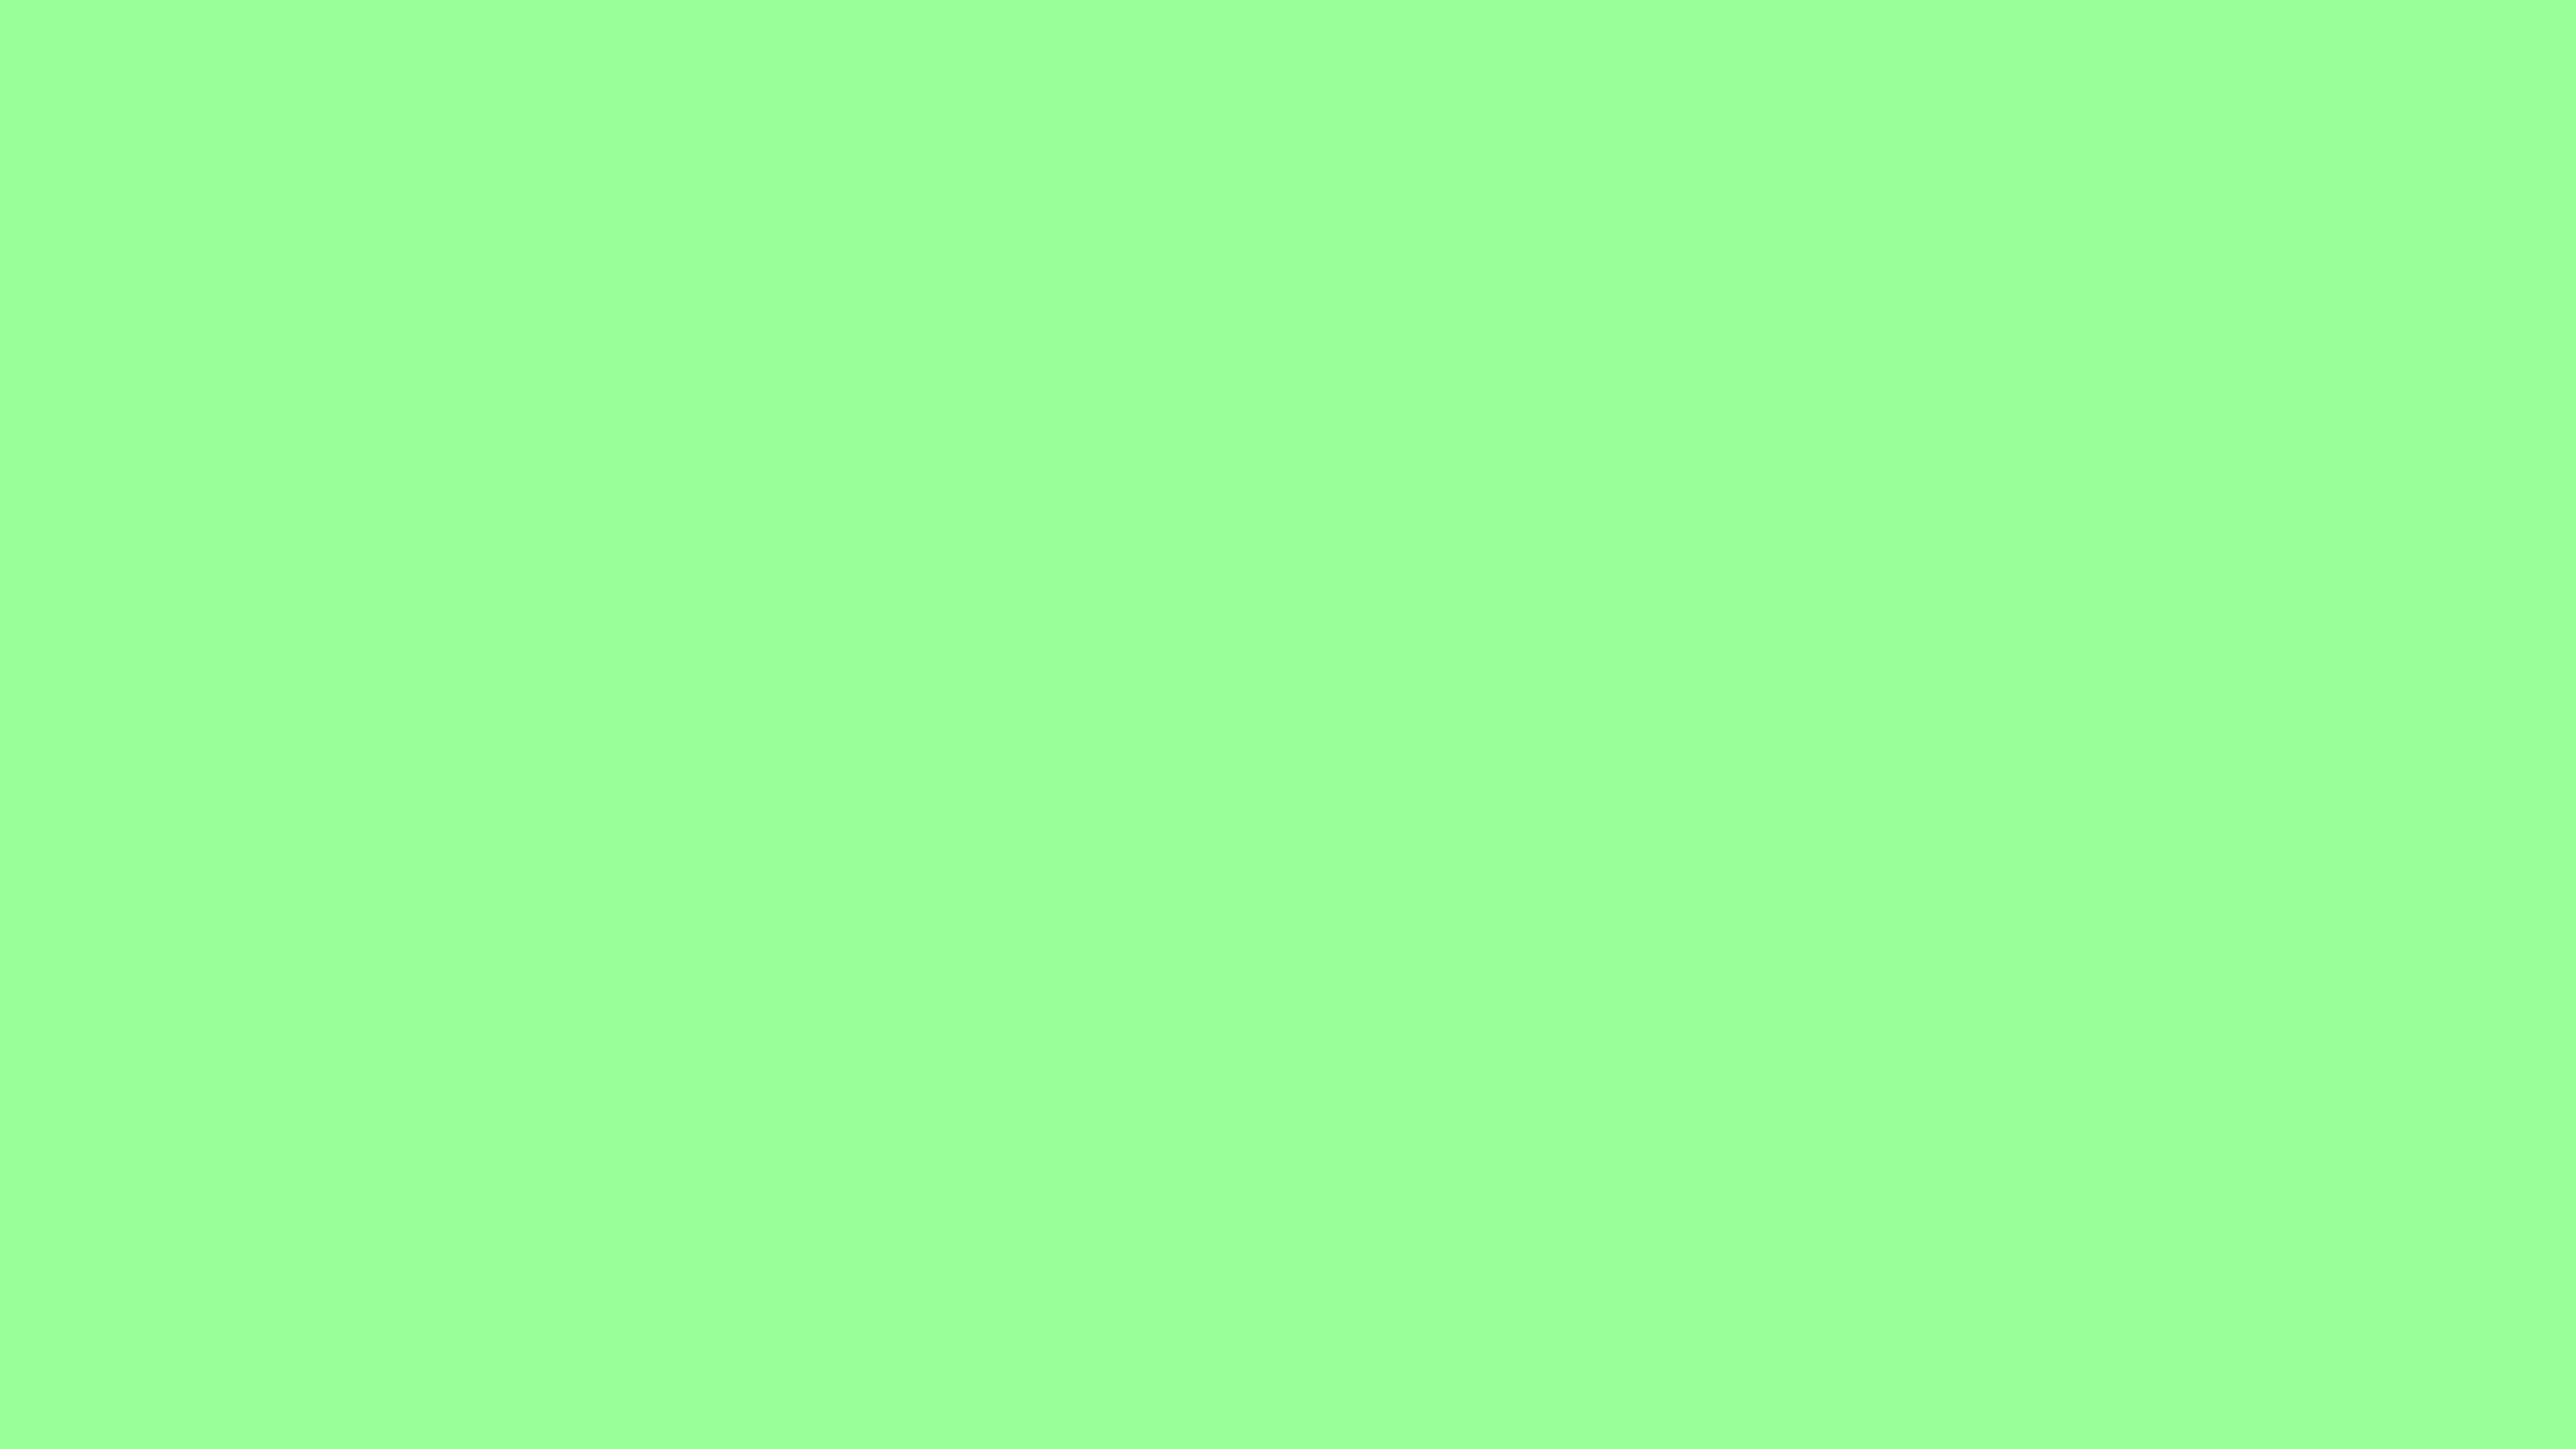 3840x2160 Mint Green Solid Color Background